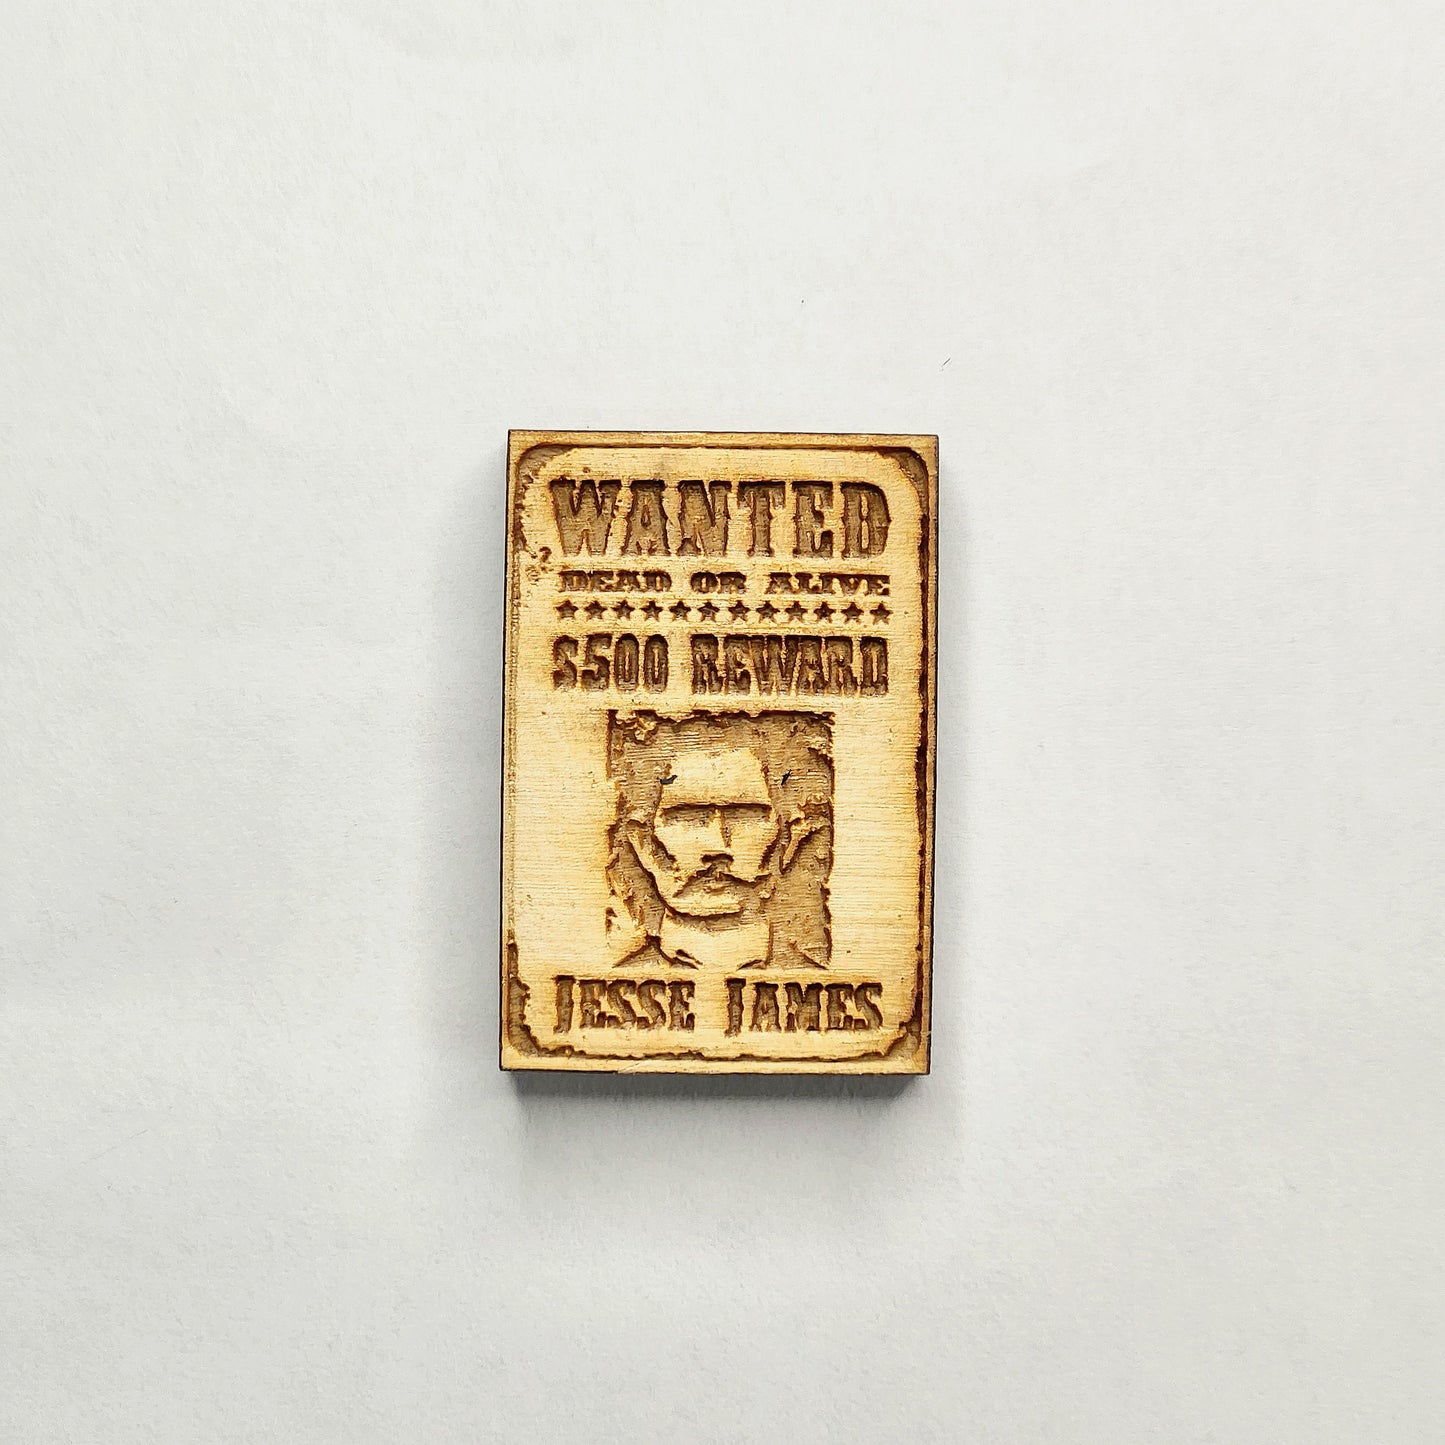 'Jesse James Wanted' Magnet